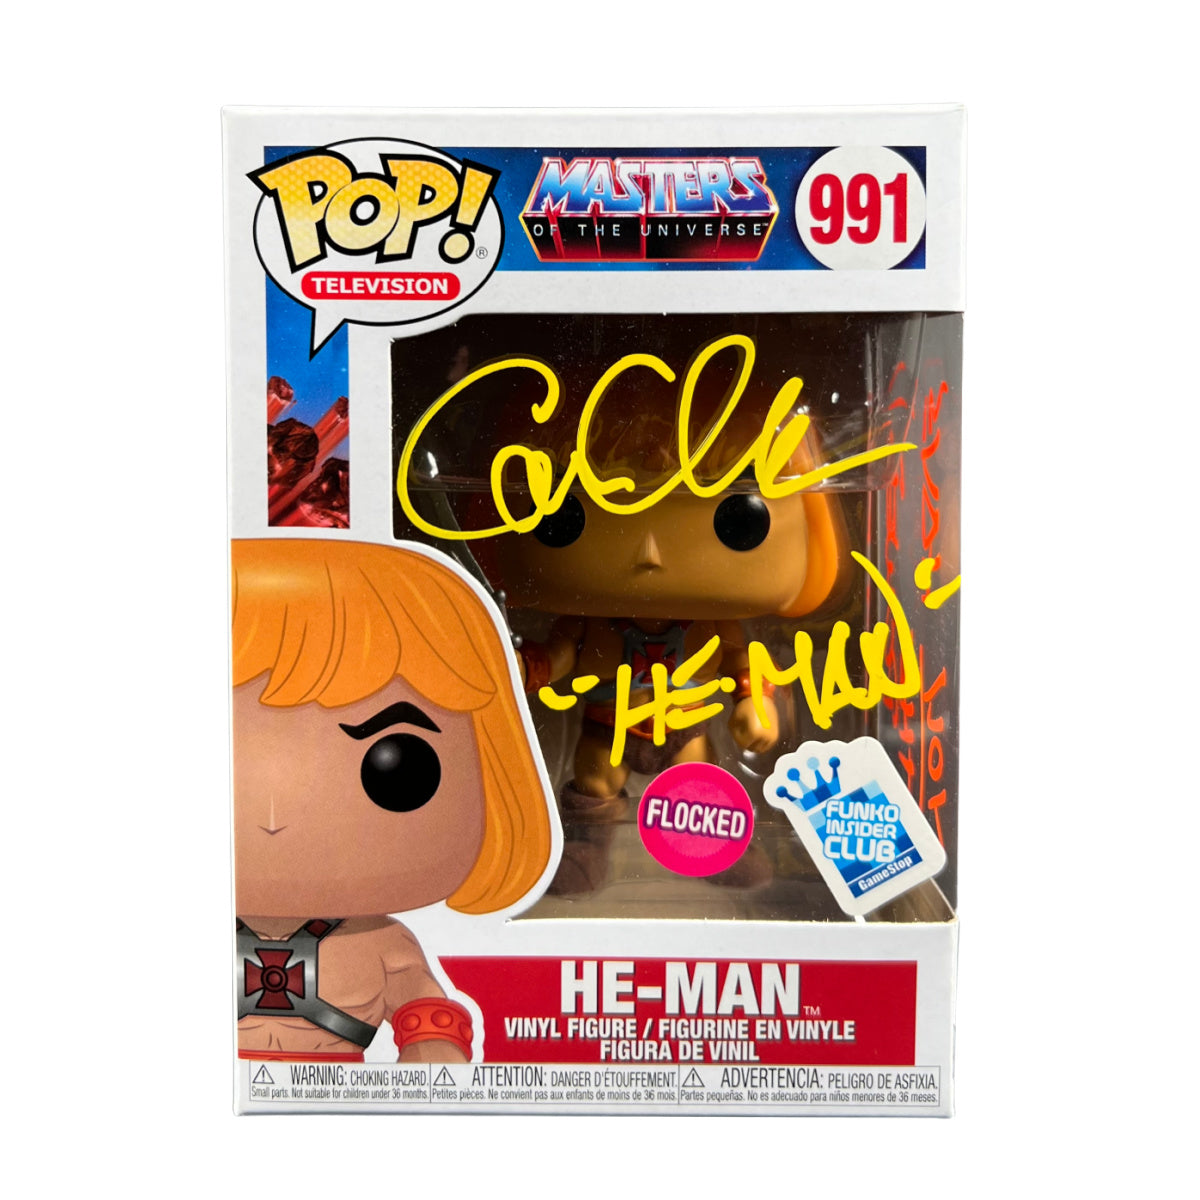 CAM CLARKE SIGNED Funko POP Masters of the Universe He-Man Autographed JSA